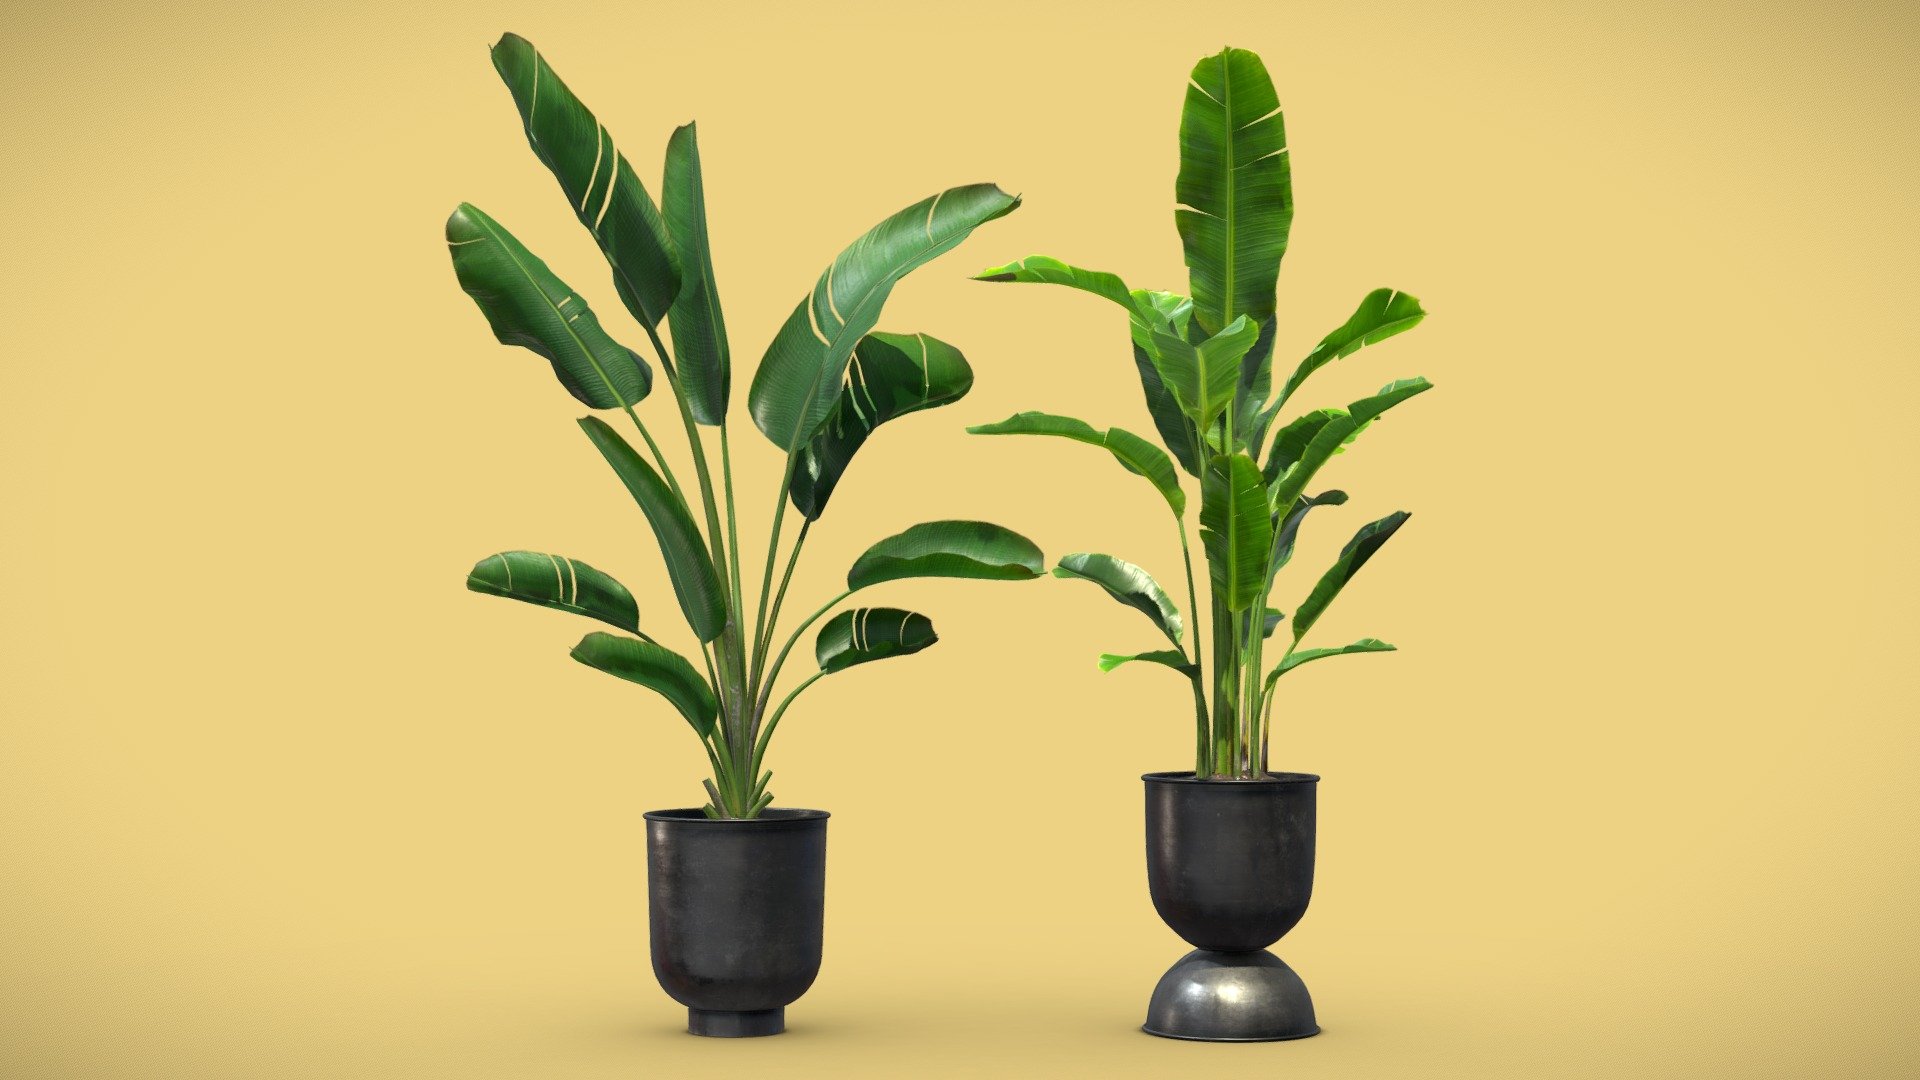 Strelitzia Set - Banana Plant

Strelitzia Reginae and Strelitzia Nicolai are beautiful houseplants highly sought after due to the exquisite beauty of their large, long leaves. The Strelitzia originates from South Africa and owes its nickname to the shape and colour of the plant. Theses potted houseplants will bring tropical fair to your indoor renders. 

4k Textures




Vertices  21 624

Polygons  41 475

Triangles 39 770
 - Strelitzia Set - Banana Plant - Buy Royalty Free 3D model by AllQuad 3d model